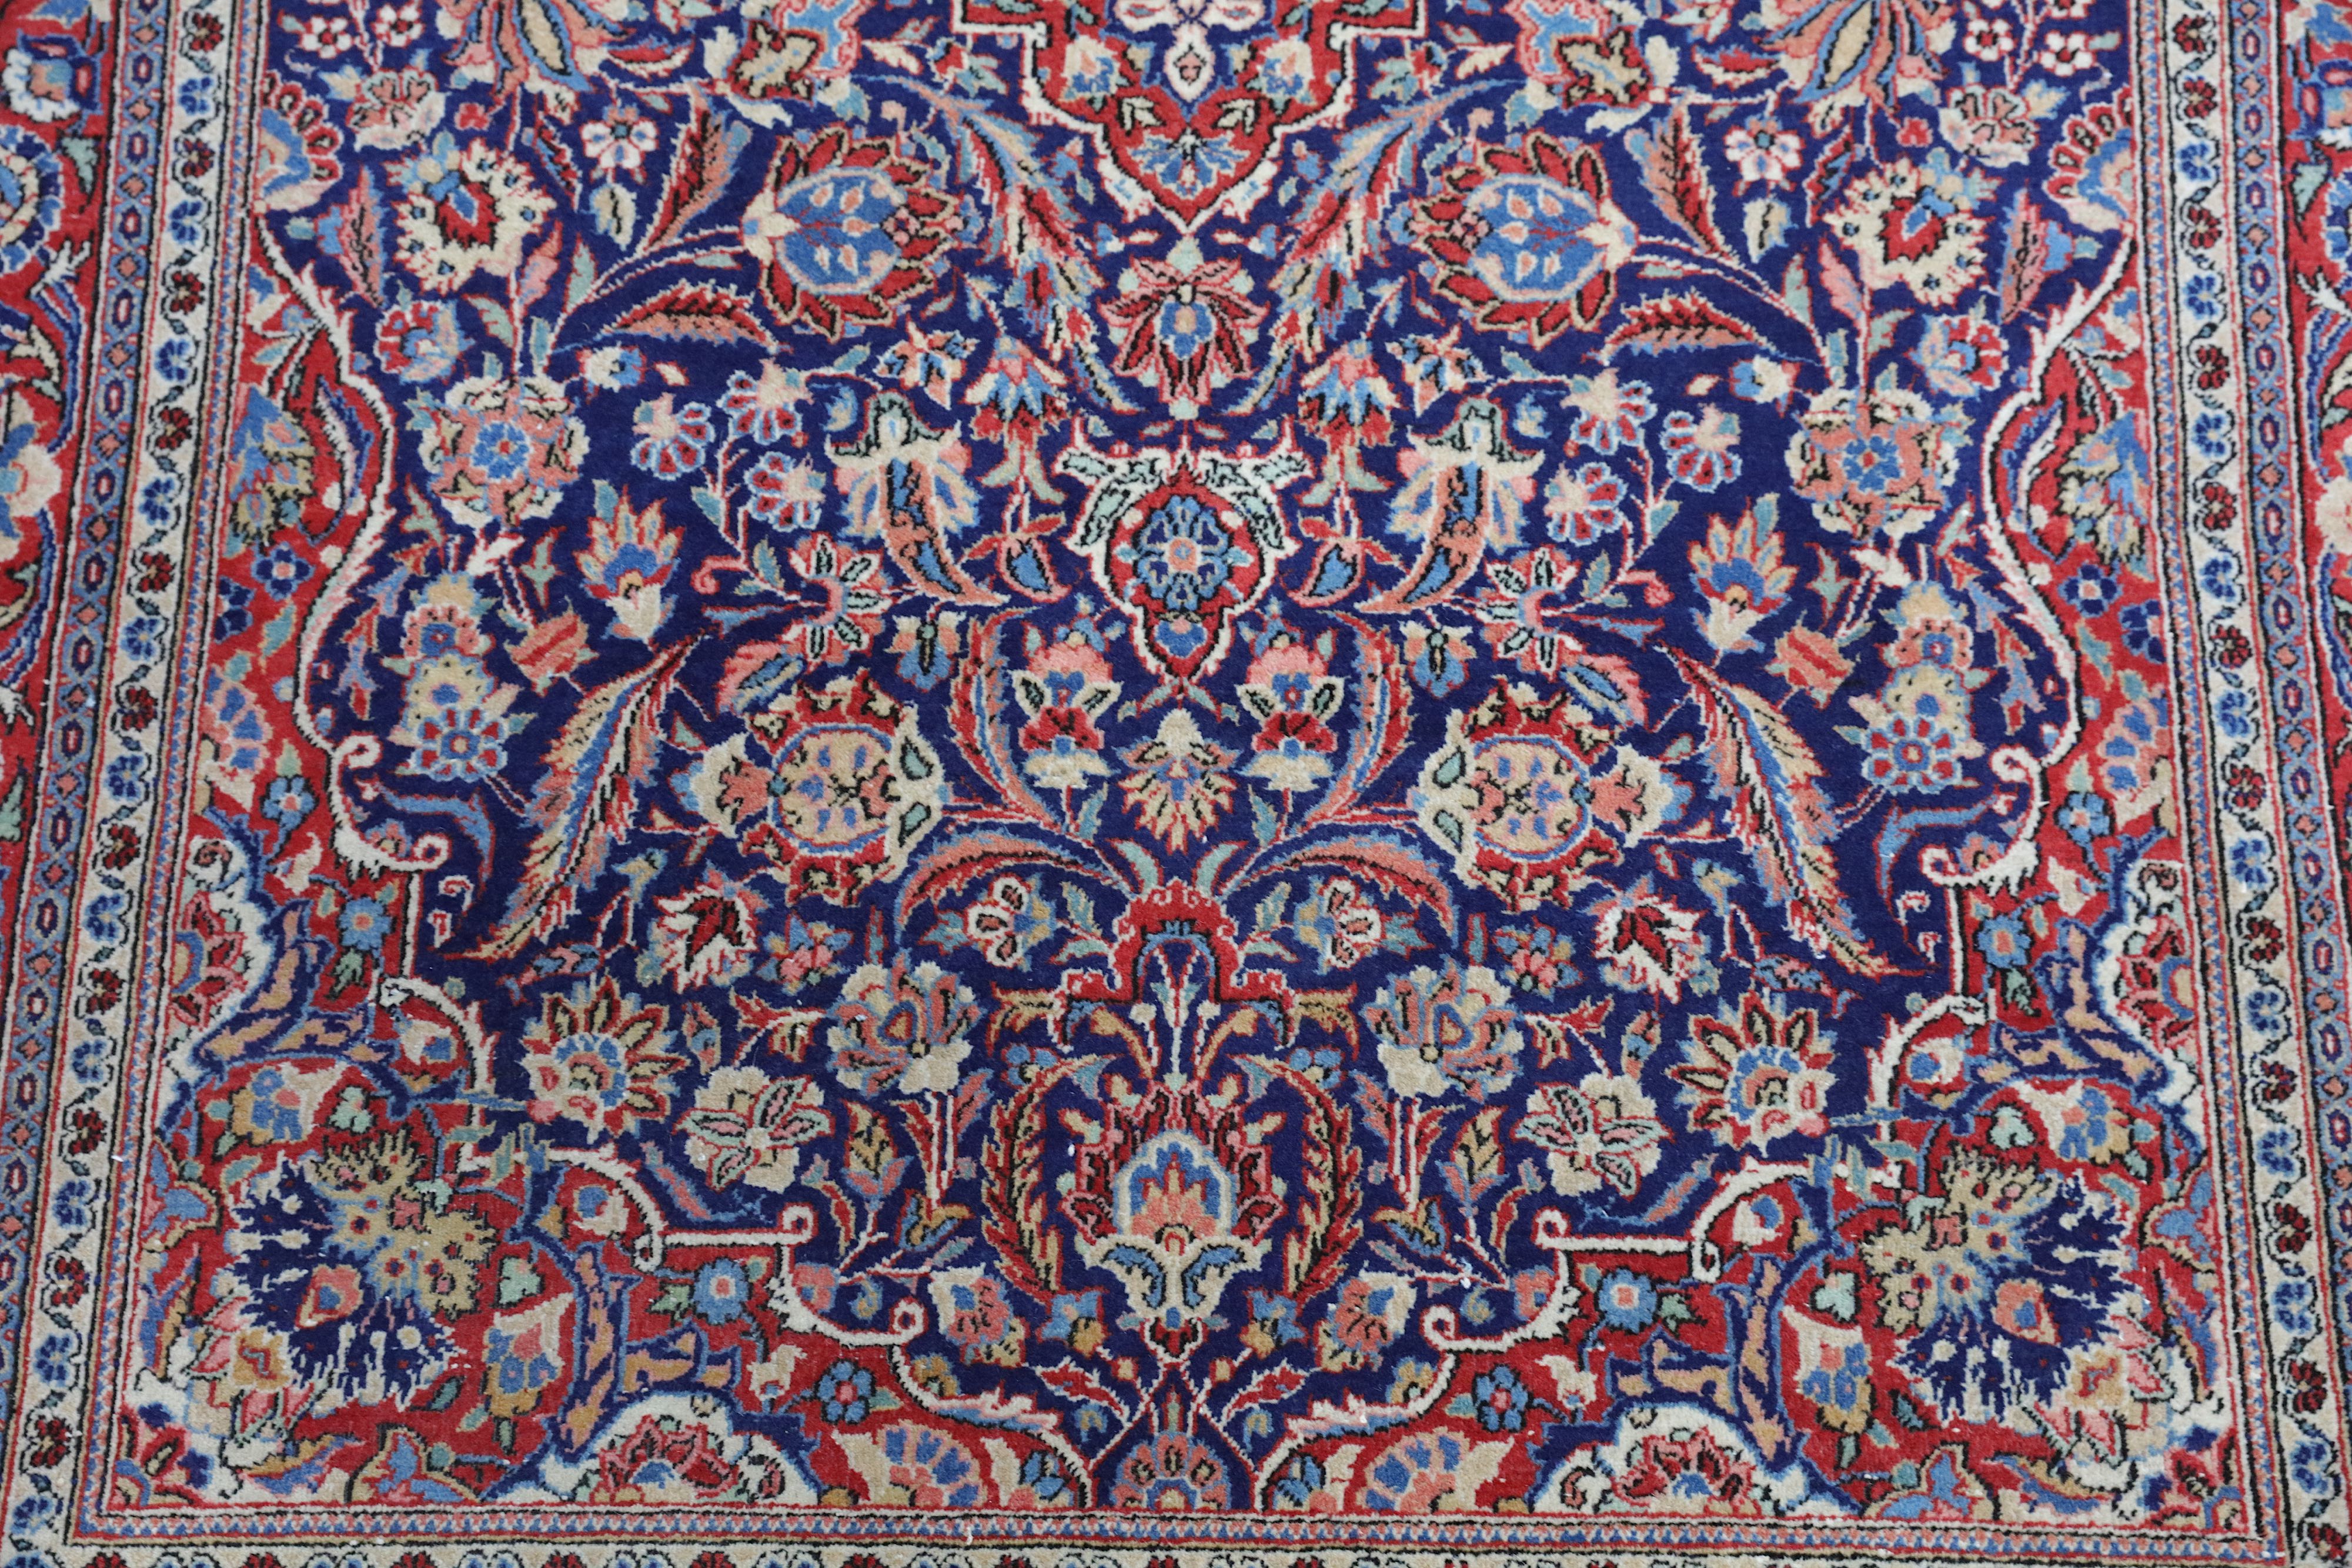 A VERY FINE KASHAN RUG, CETRAL PERSIA - Image 4 of 7